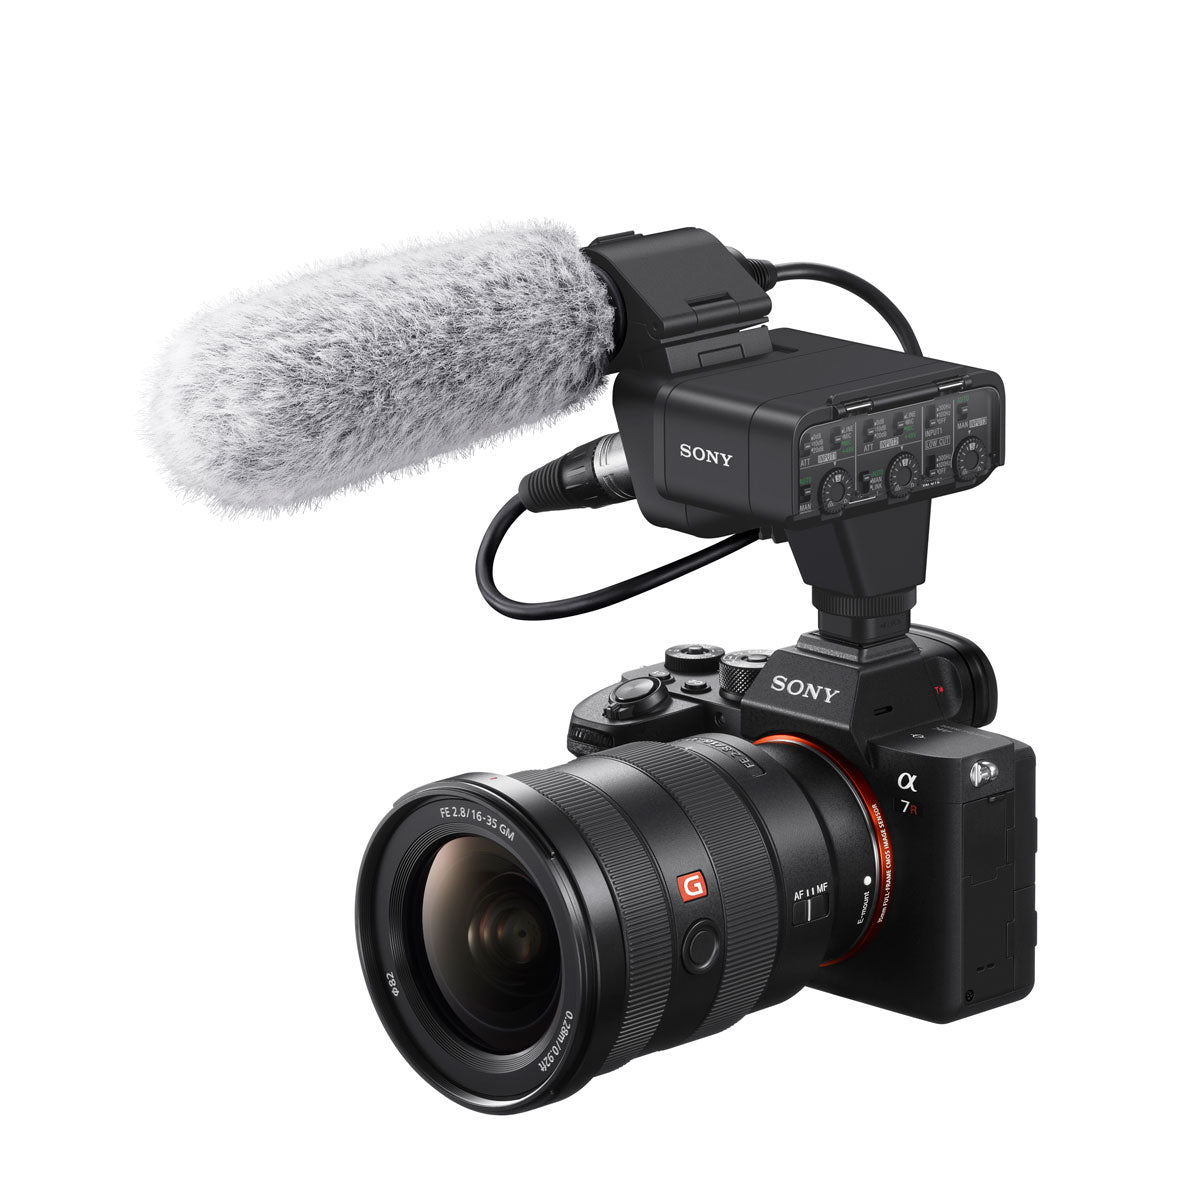 Sony XLR-K3M Adapter Kit with Microphone